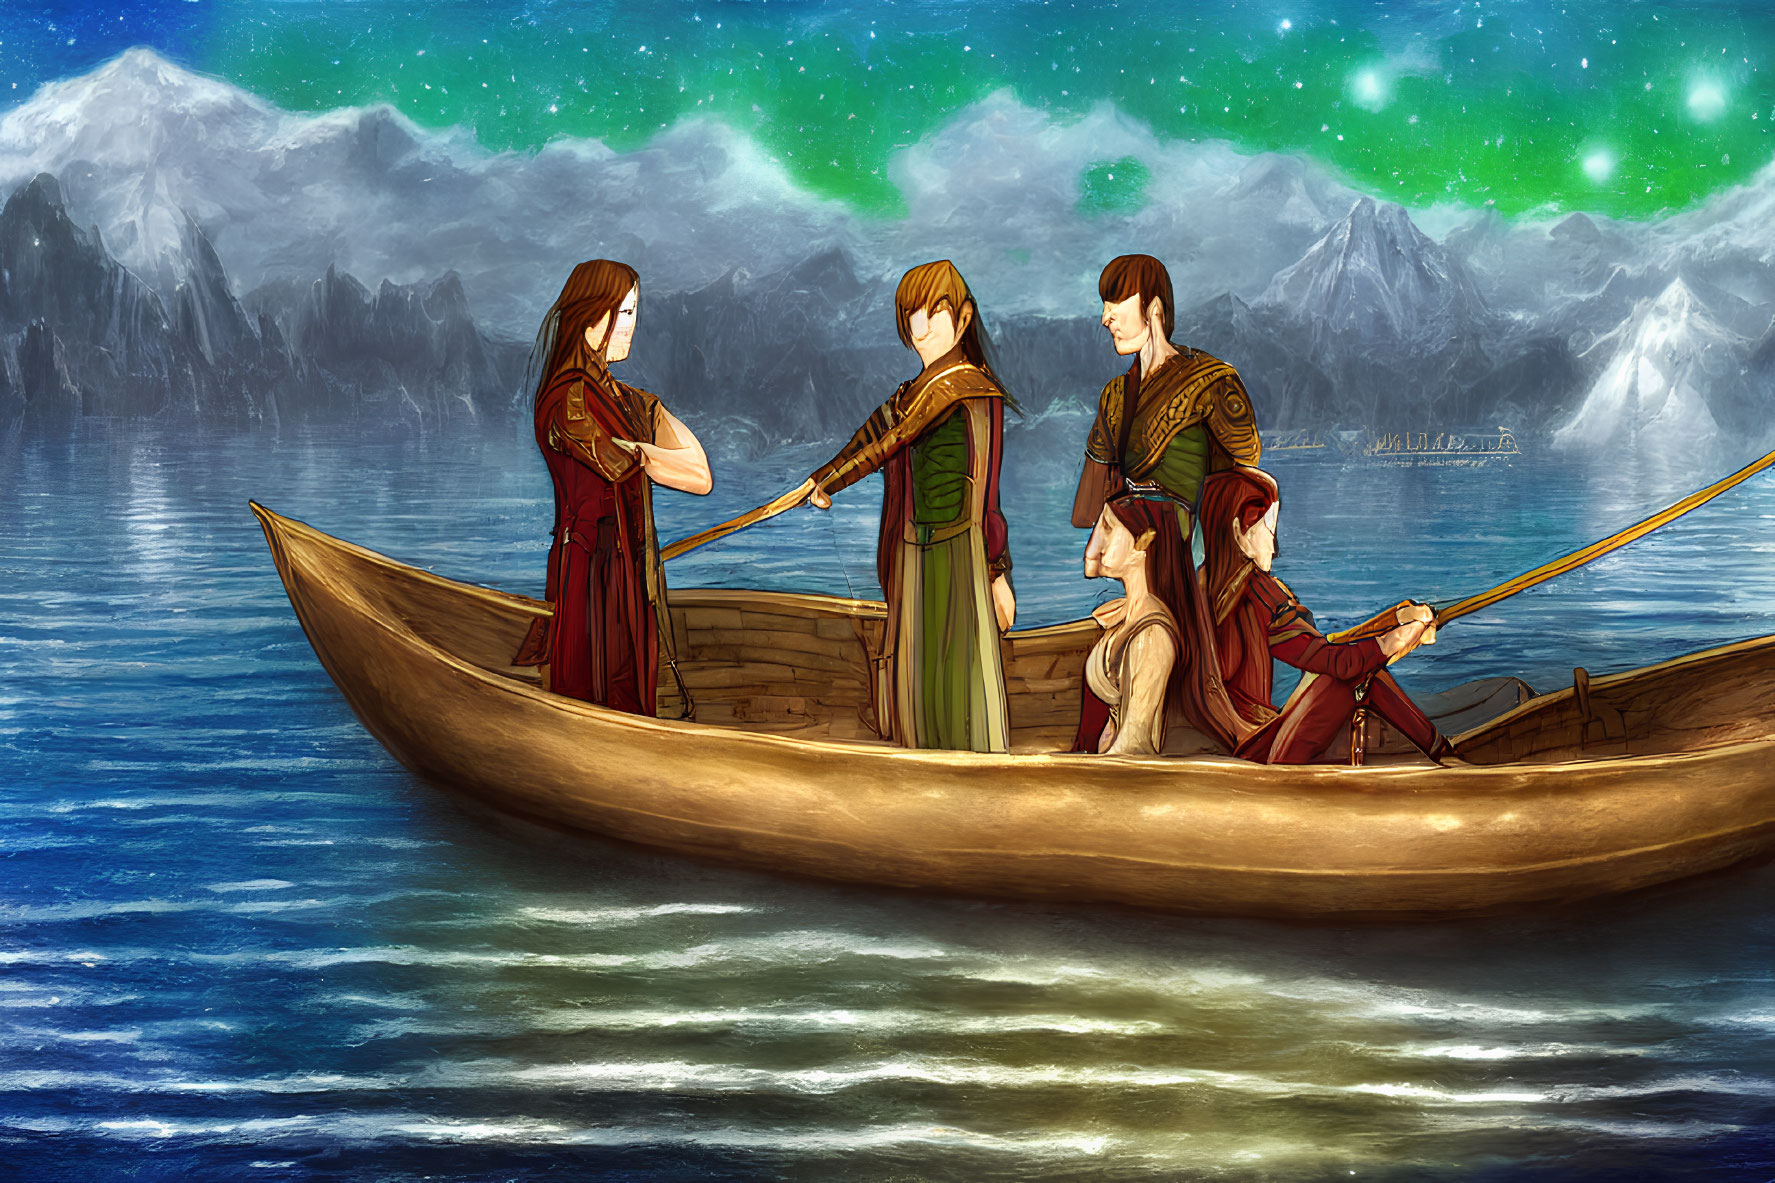 Four animated characters in historical attire on a wooden boat with oars in a serene mountain lake.